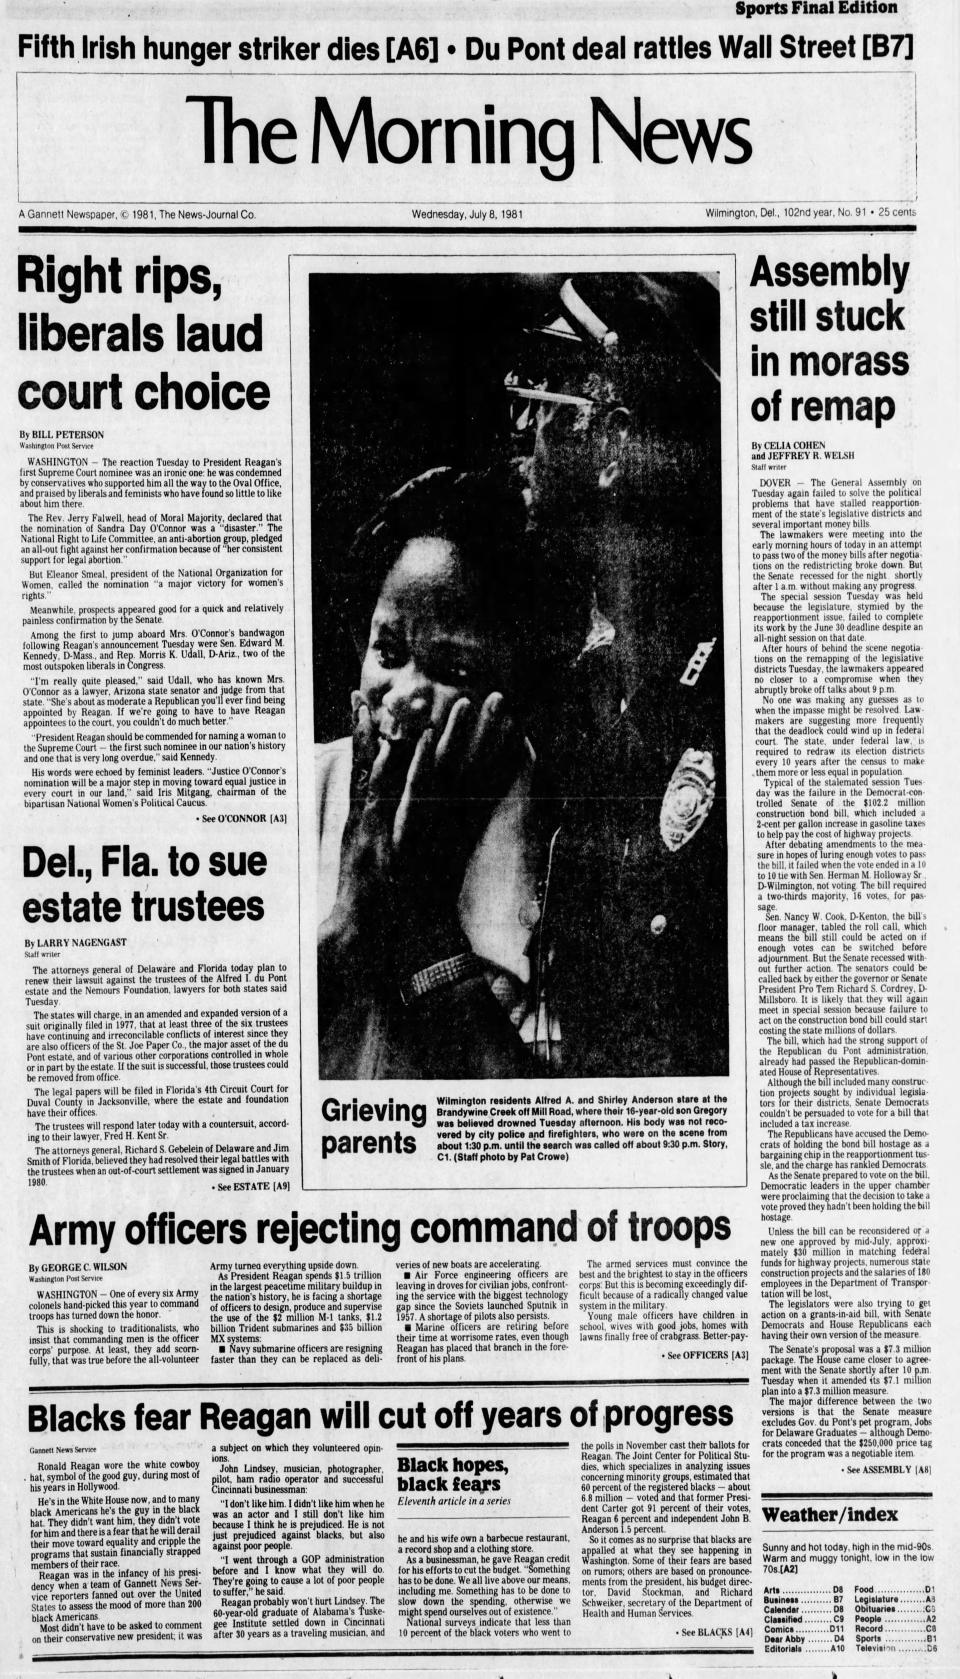 Front page of The Morning News from July 8, 1981.